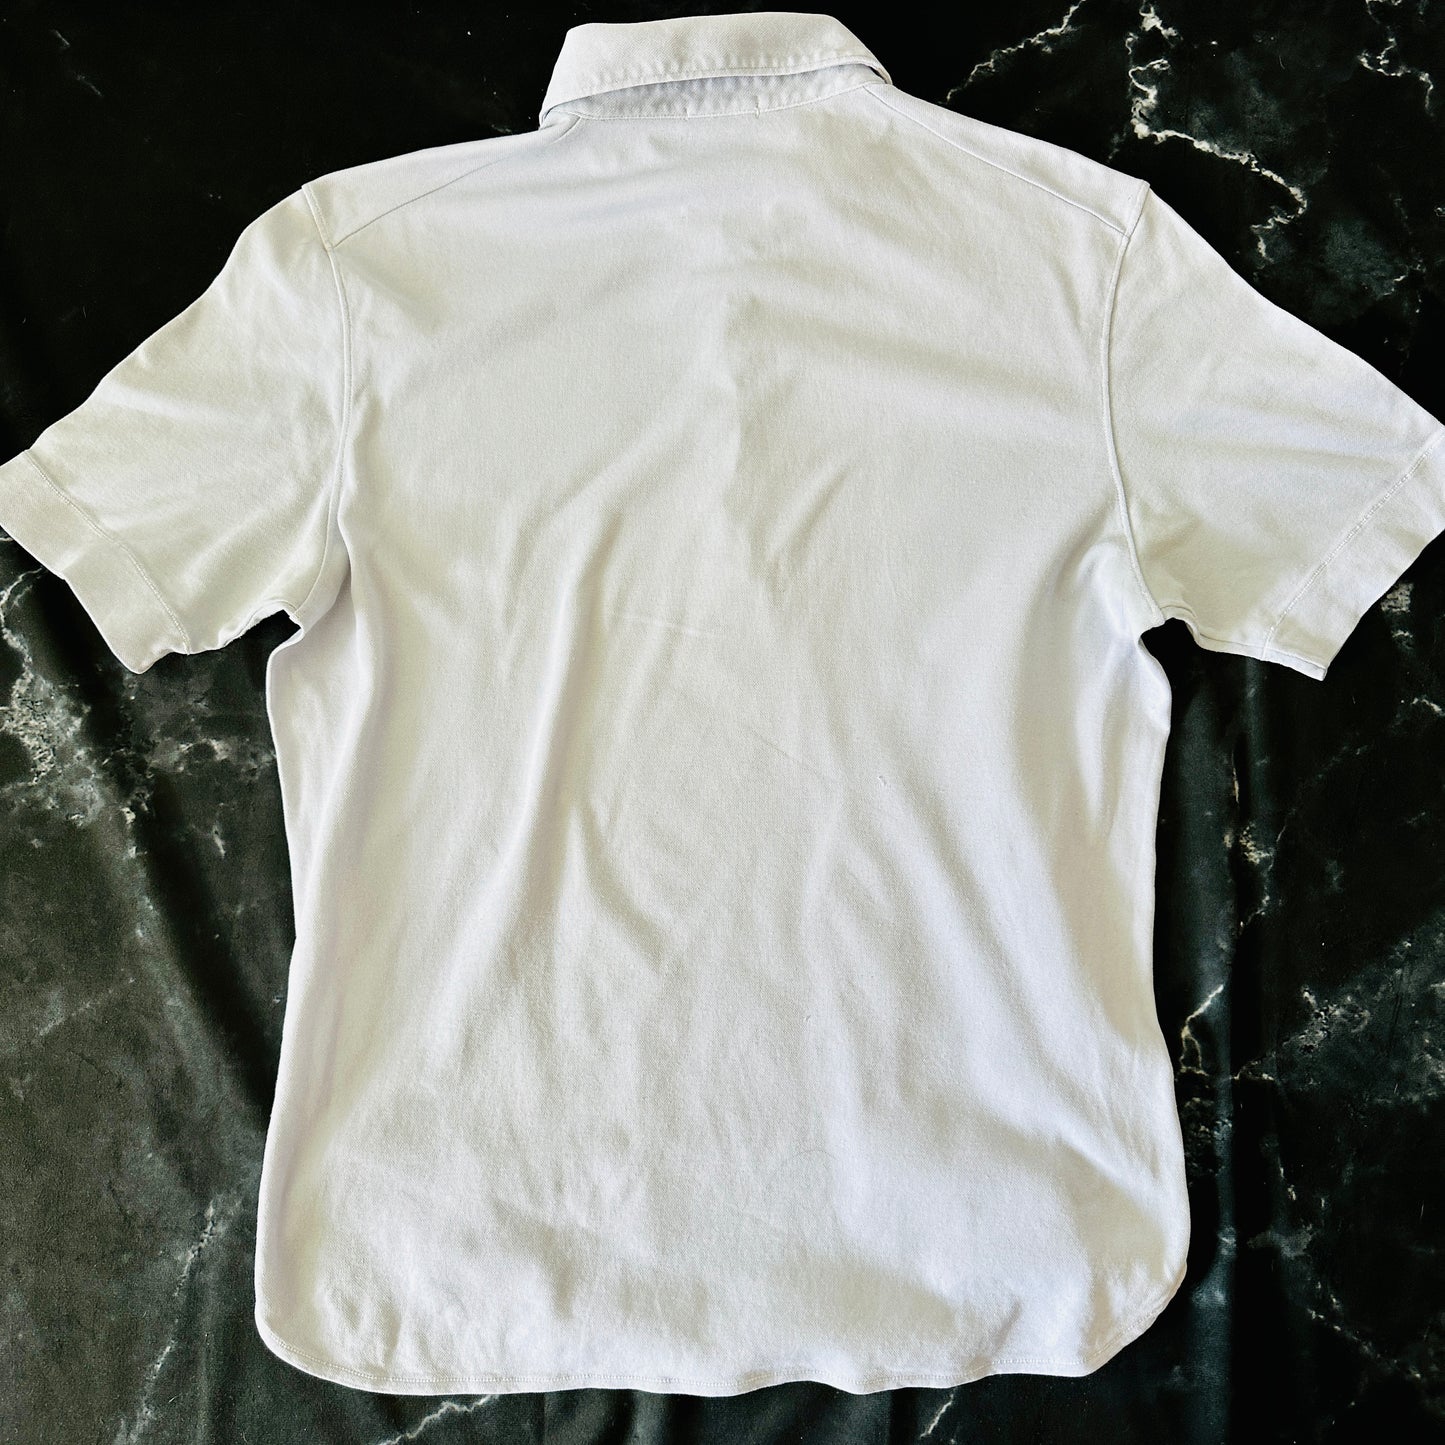 Stone Island Vintage Polo Shirt - M - Made in Italy